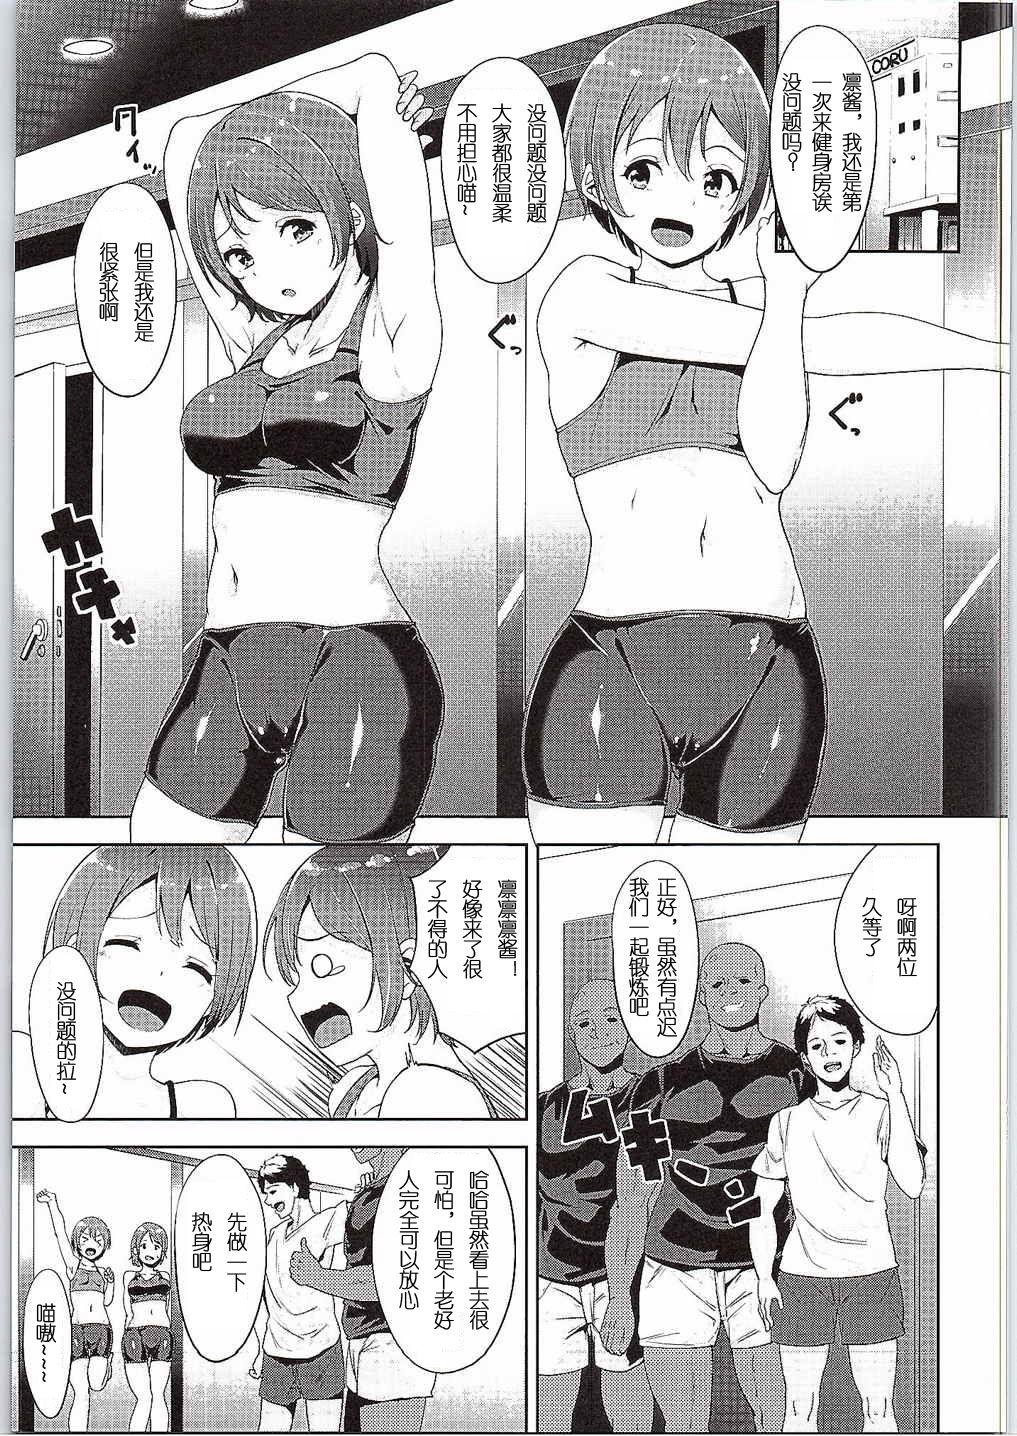 Transexual LOVE FITTING ROOM - Love live Czech - Page 4